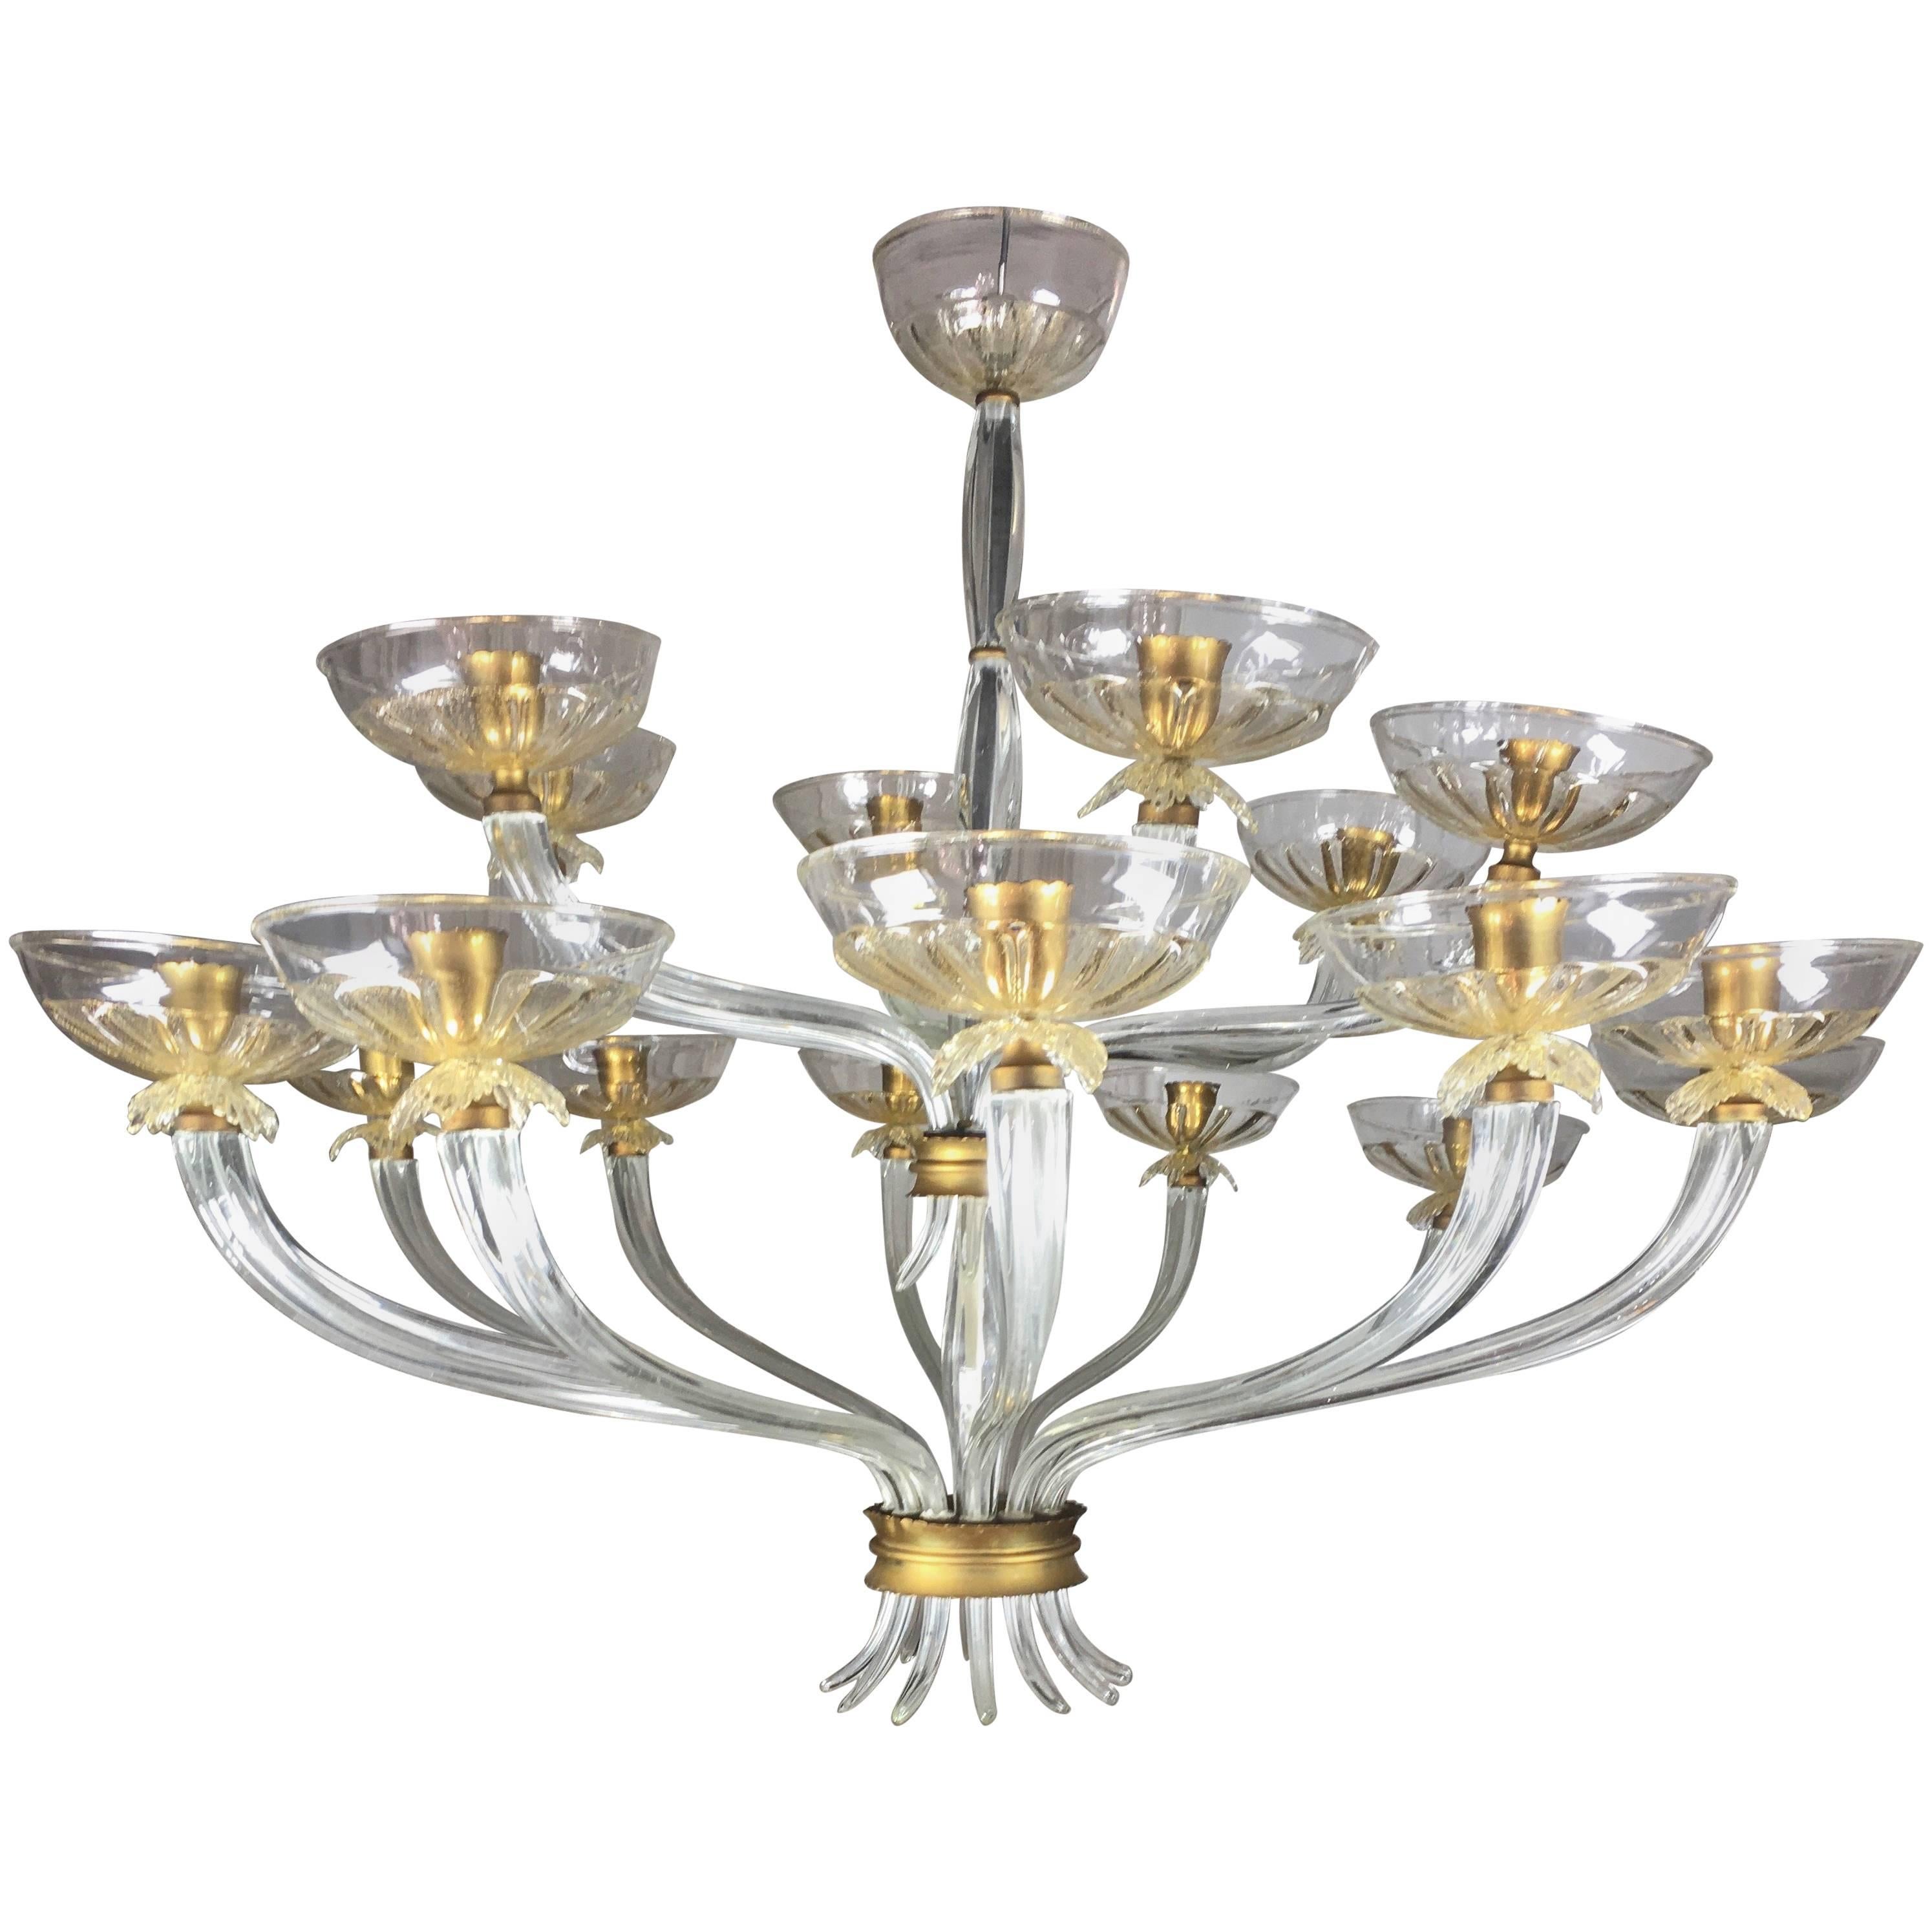 Luxurious Chandelier by Barovier & Toso, Venice, 1940s